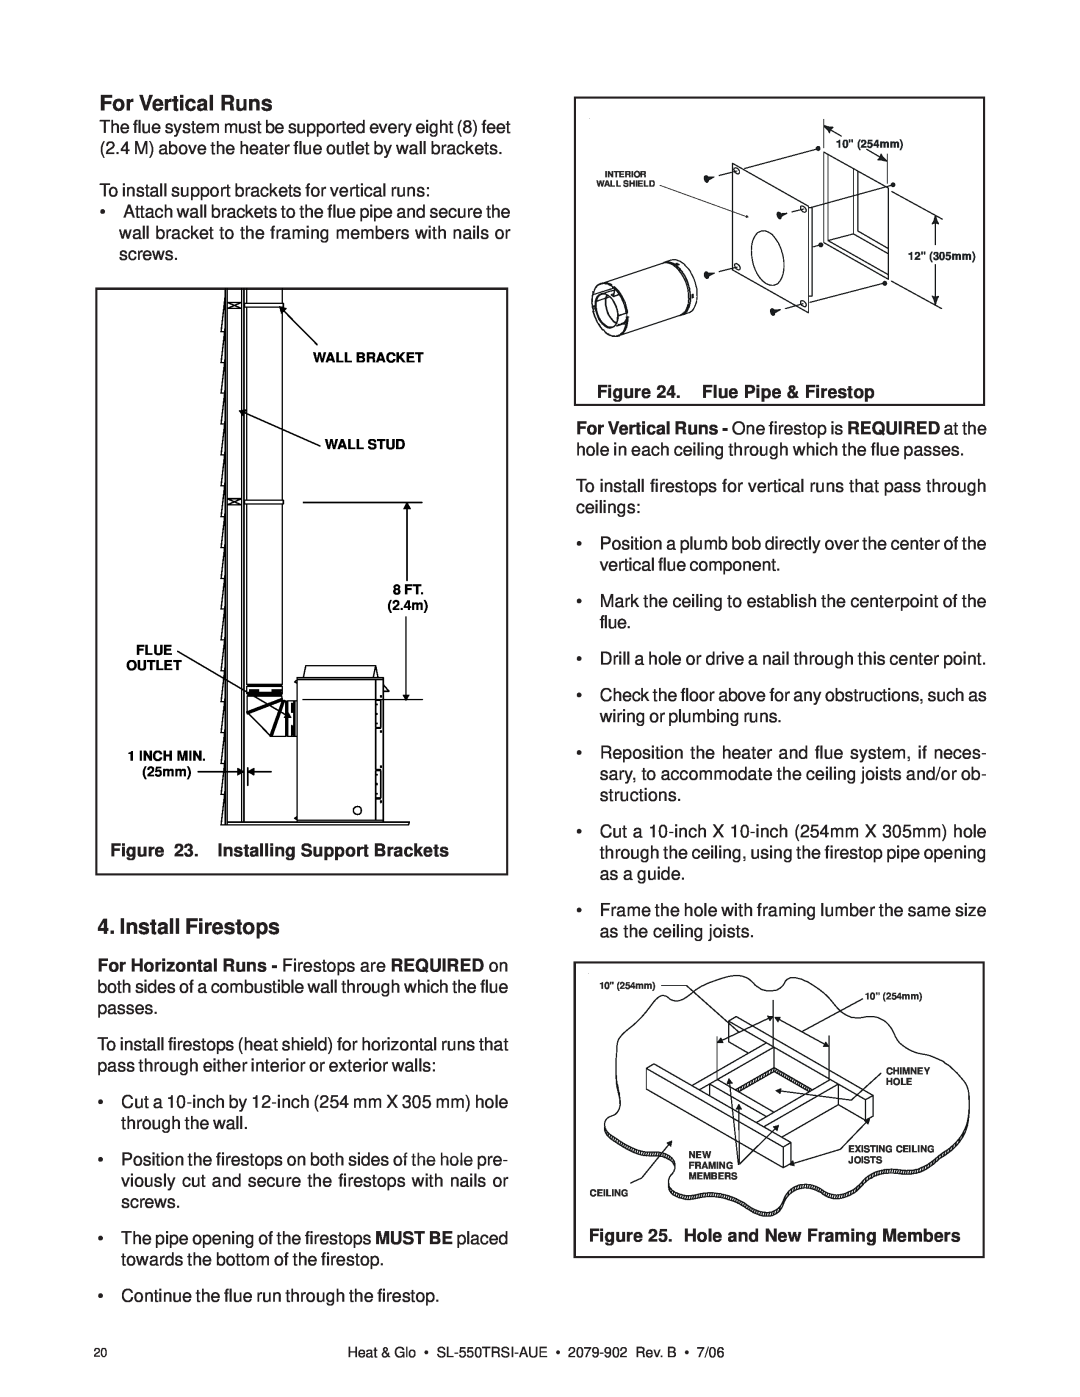 Hearth and Home Technologies SL-550TRSI-AUE manual For Vertical Runs, Install Firestops, Installing Support Brackets 